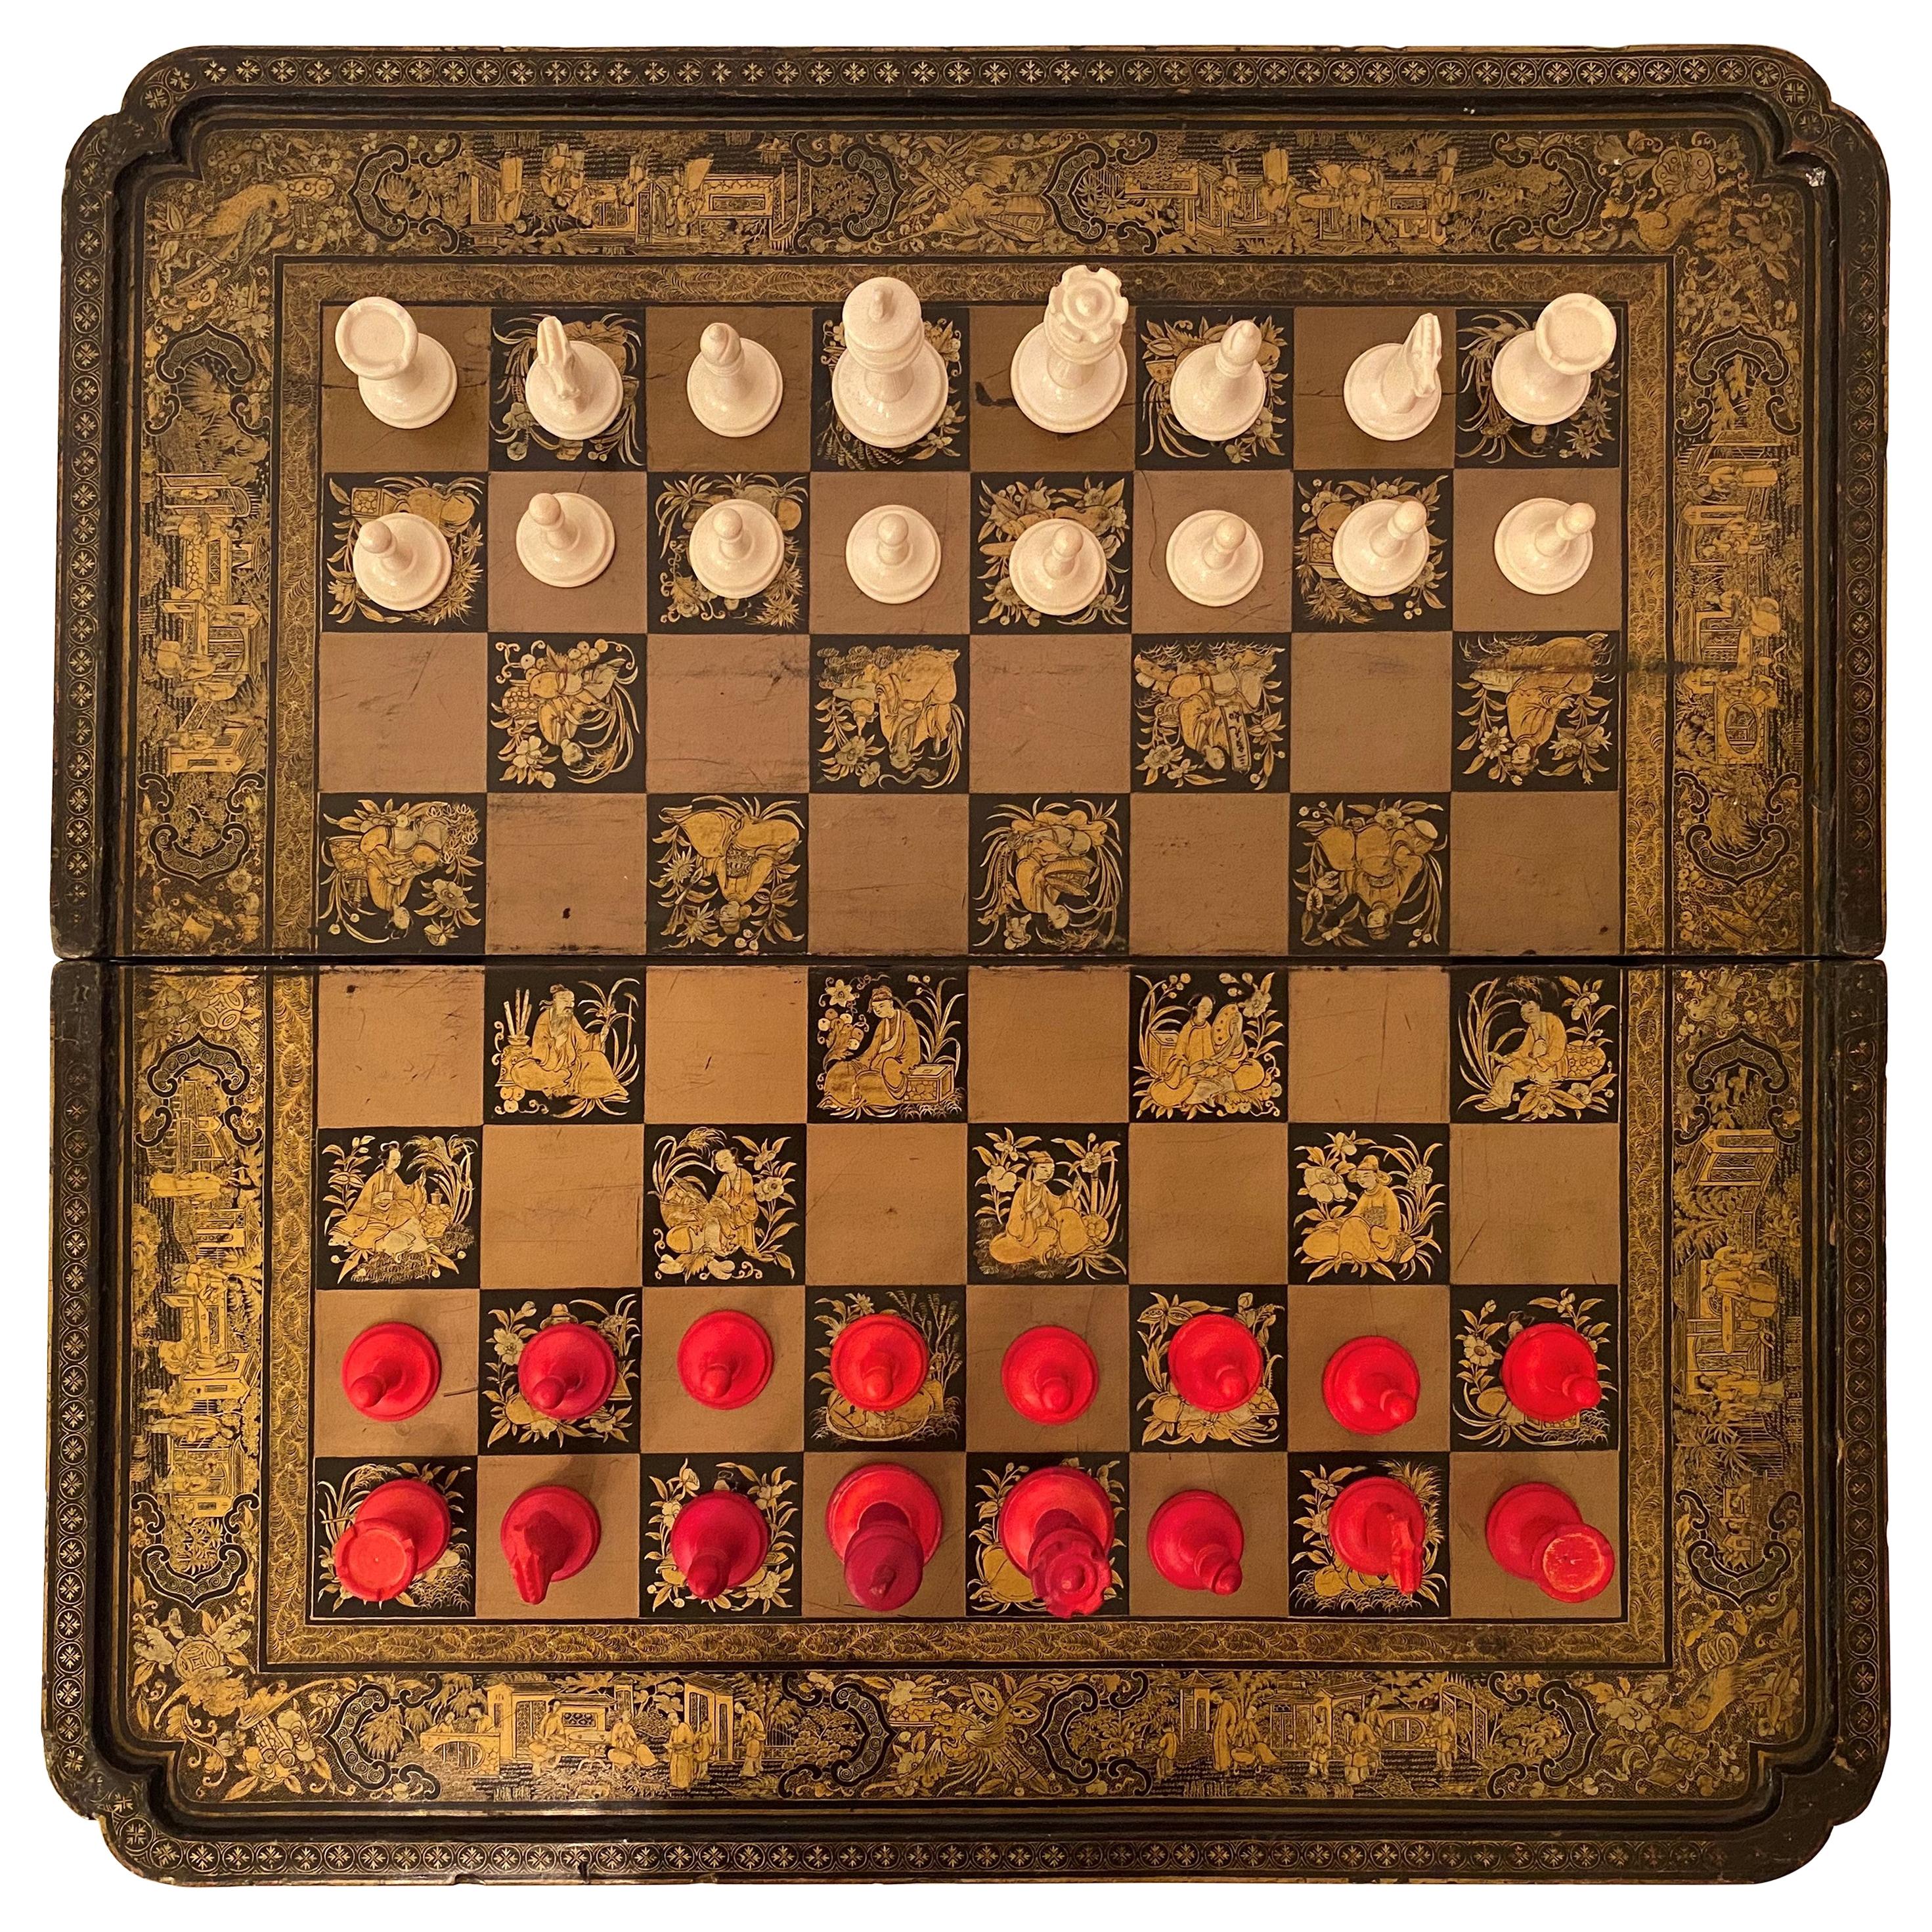 Early 19th Century Chinese Export Lacquer Chess and Backgammon Board